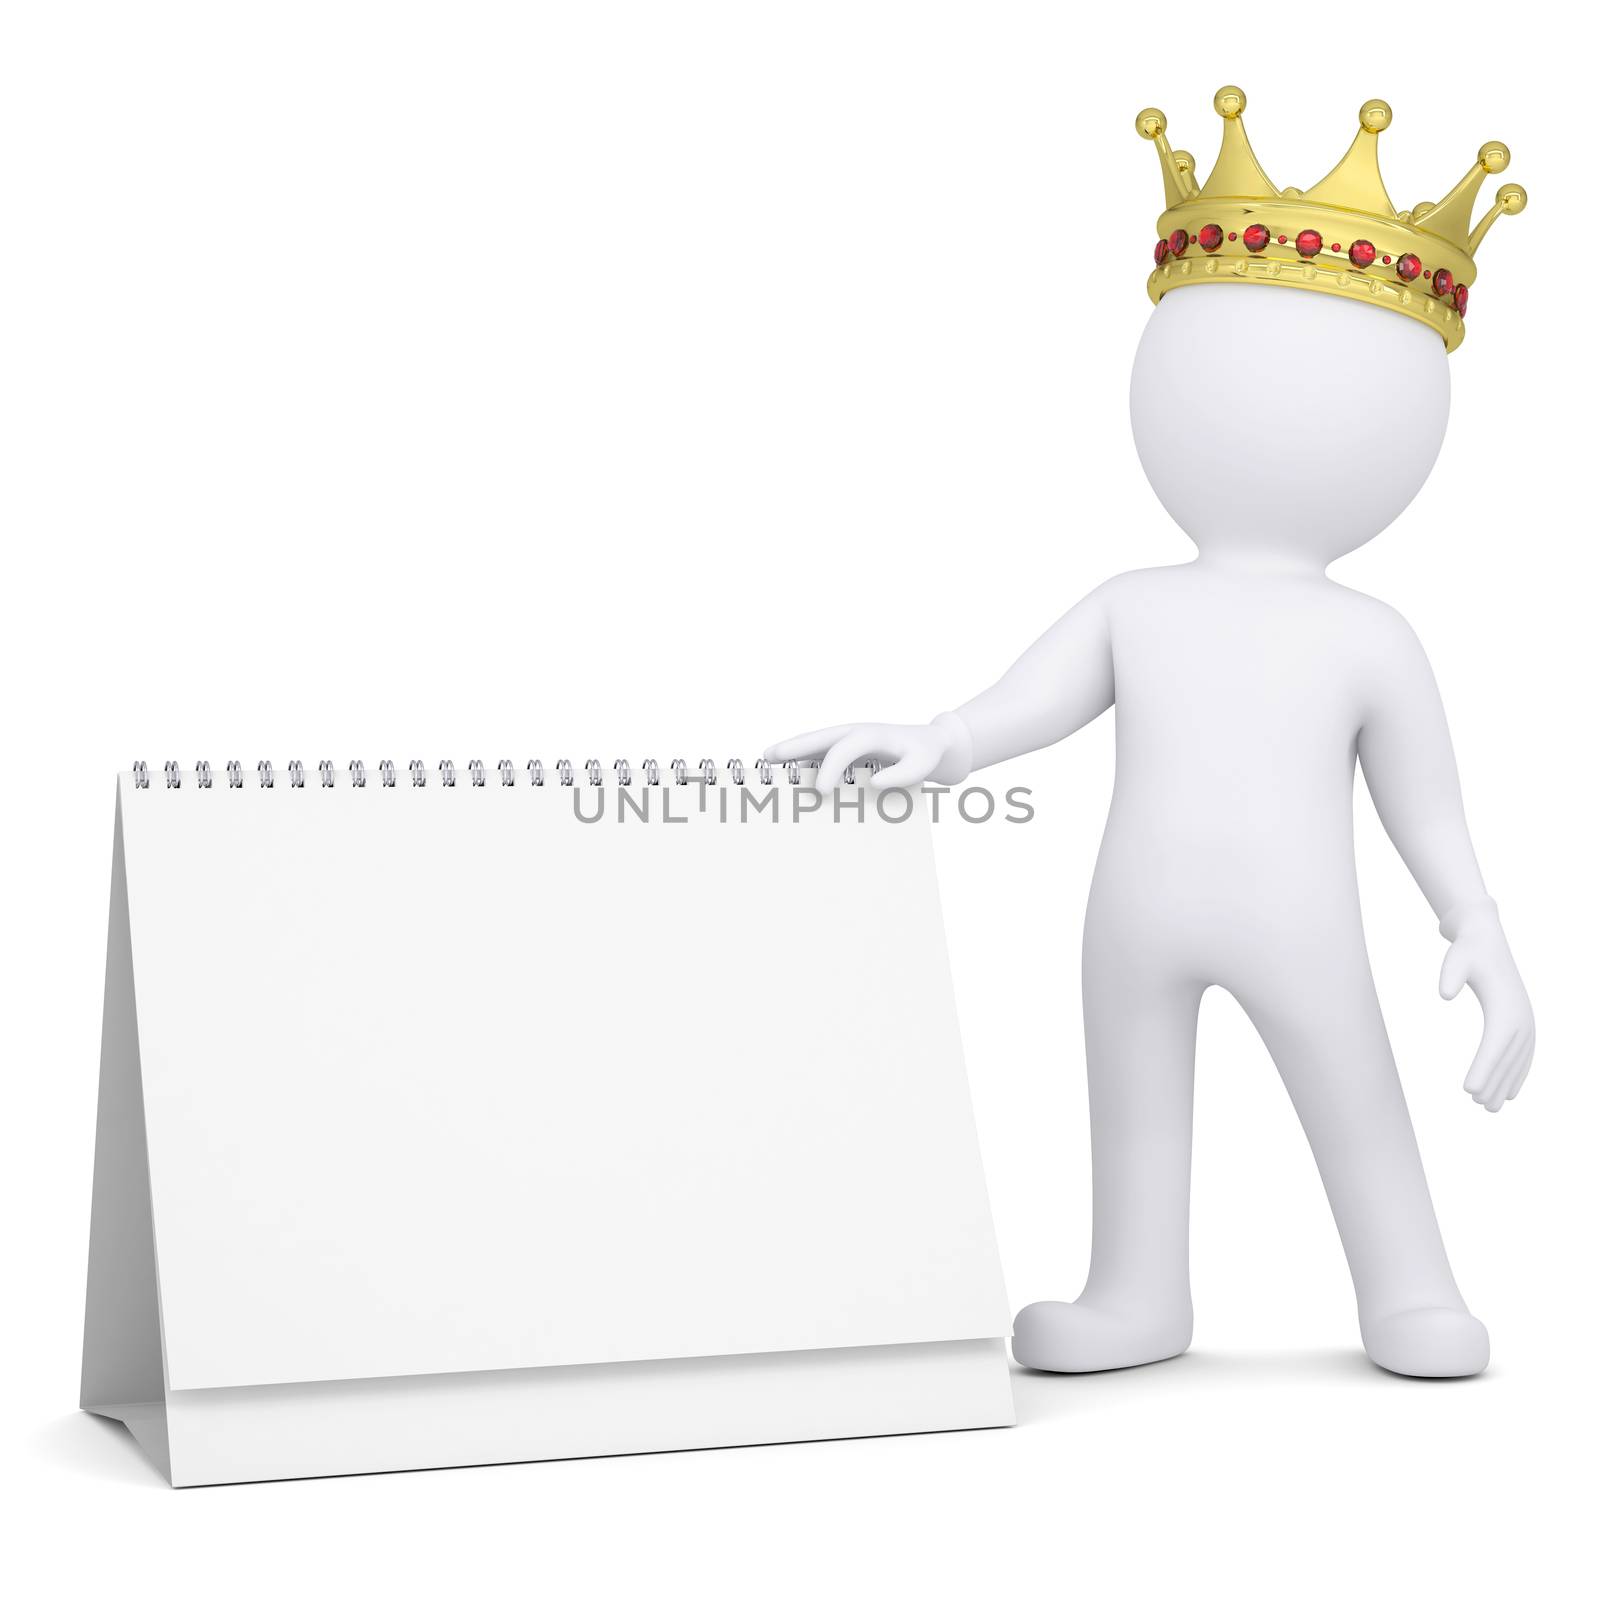 3d white man with a crown holding a desk calendar. Isolated render on a white background